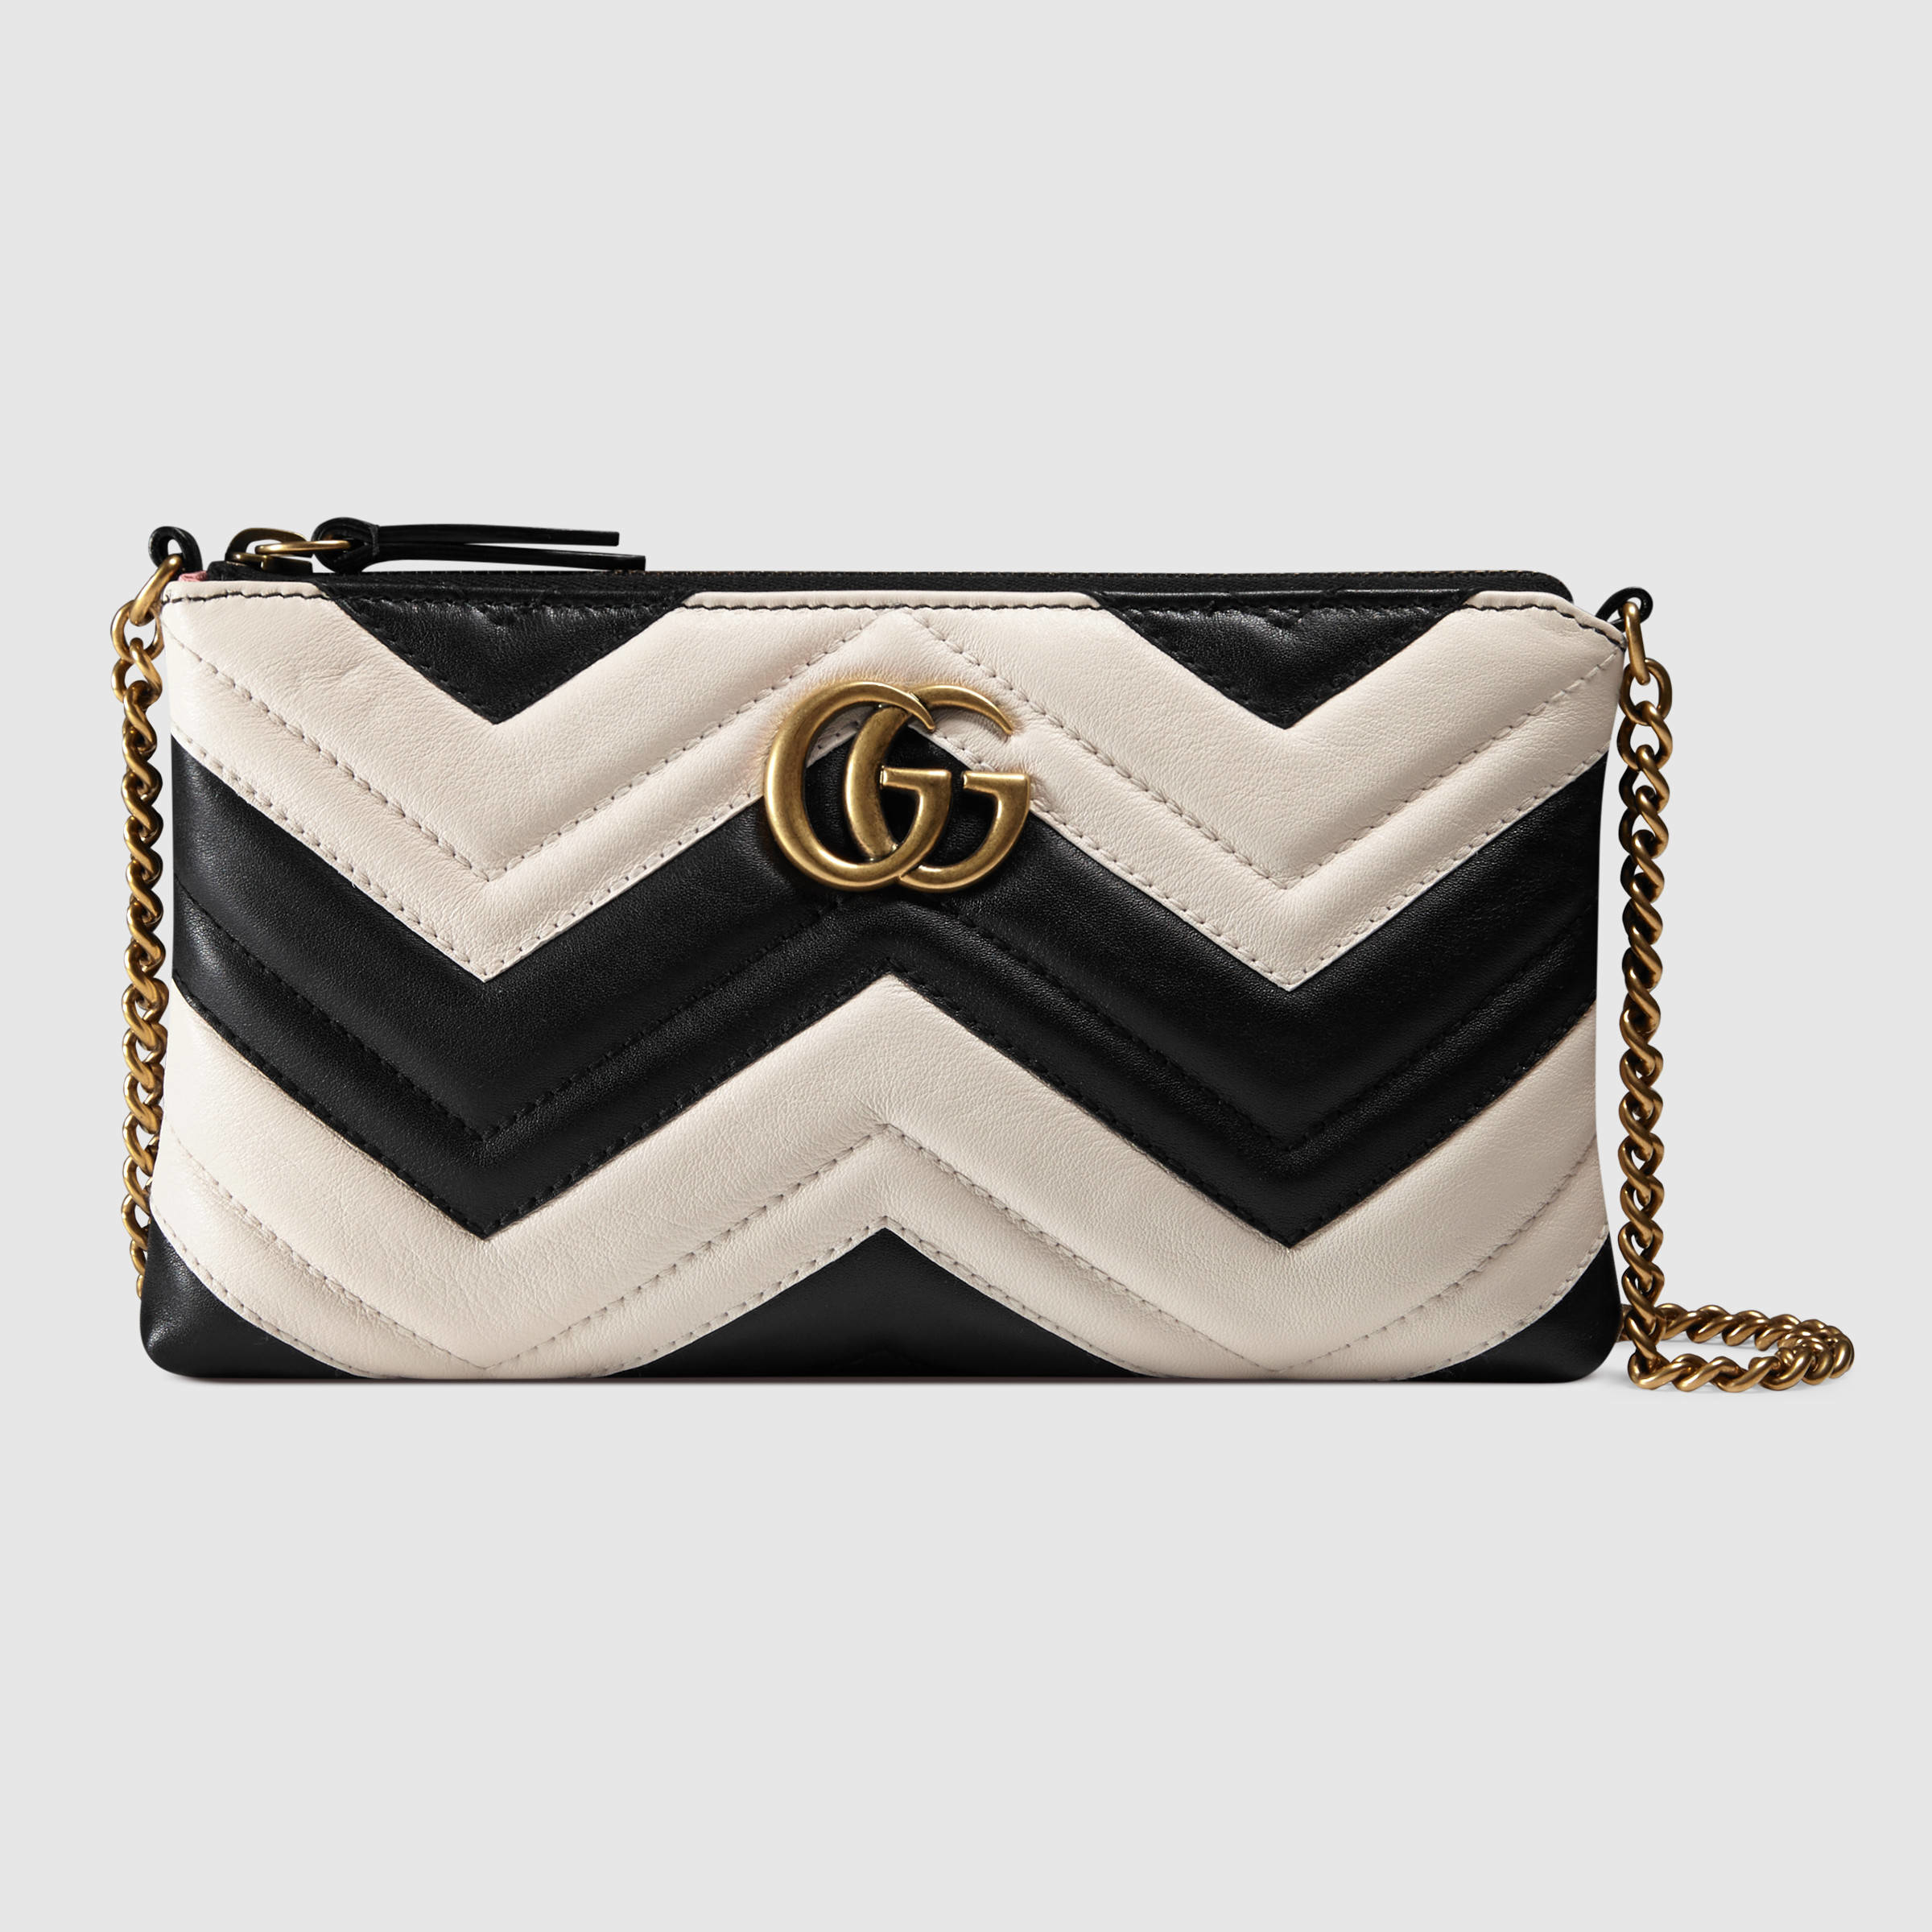 Gucci GG Marmont Mini Leather Chain Bag in Black | Lyst